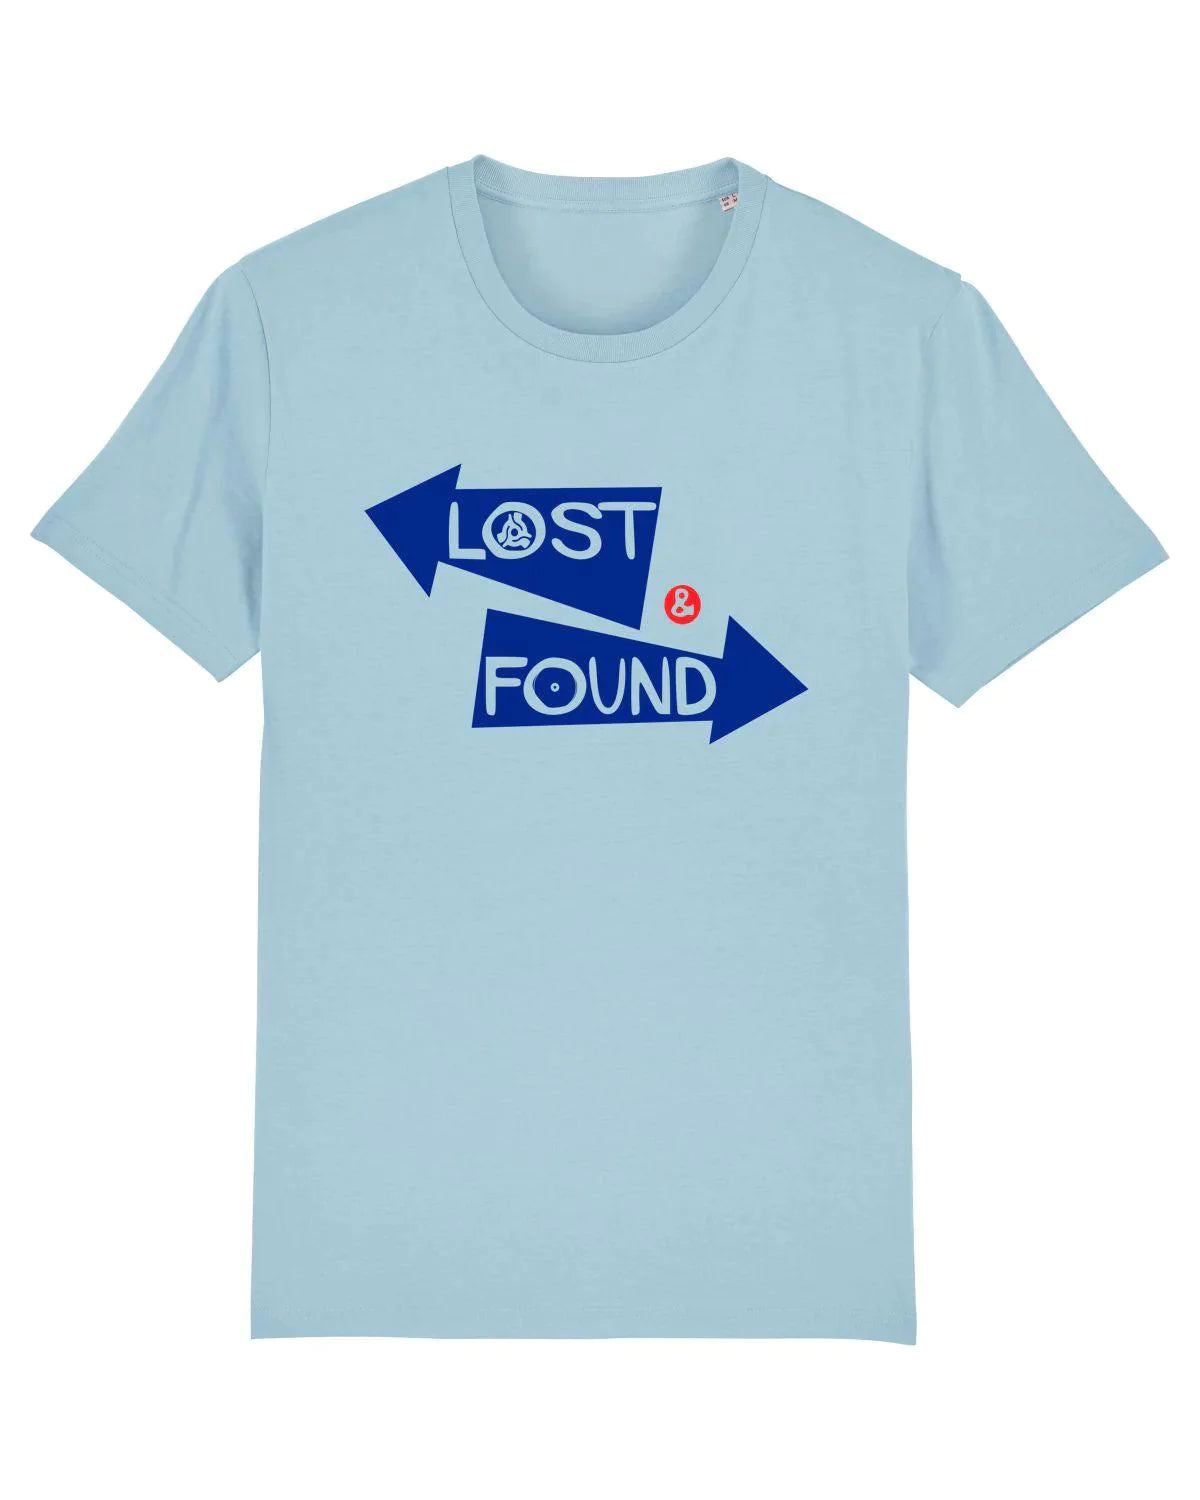 LOST & FOUND (Many Colours): Official Keb Darge T-Shirt - SOUND IS COLOUR